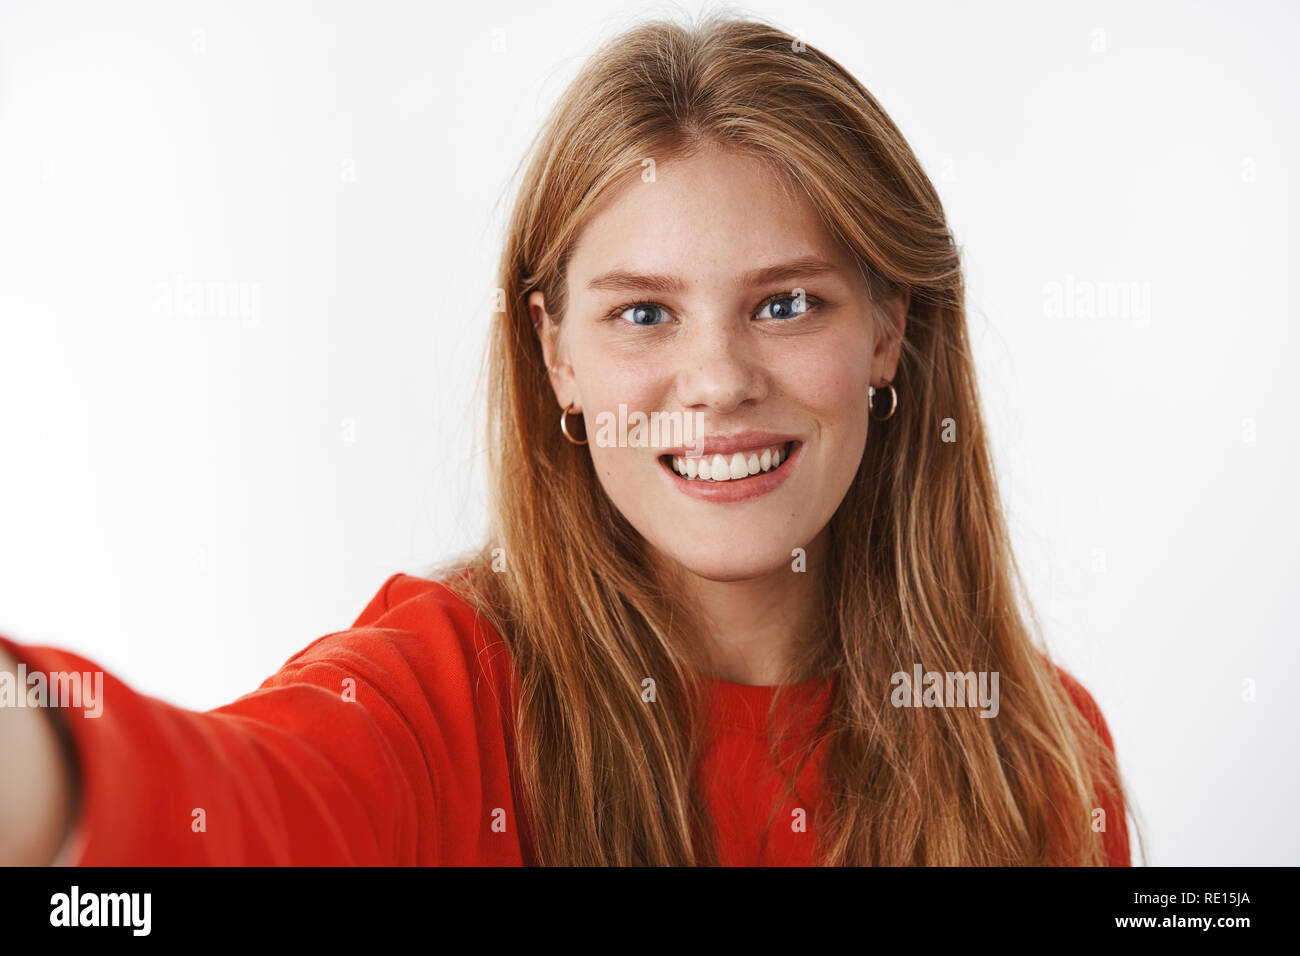 Close-up shot of nice tender young fair-haired girl with freckles, chubby cheeks and blue eyes pulling hand forward, holding camera and smiling as if  Stock Photo